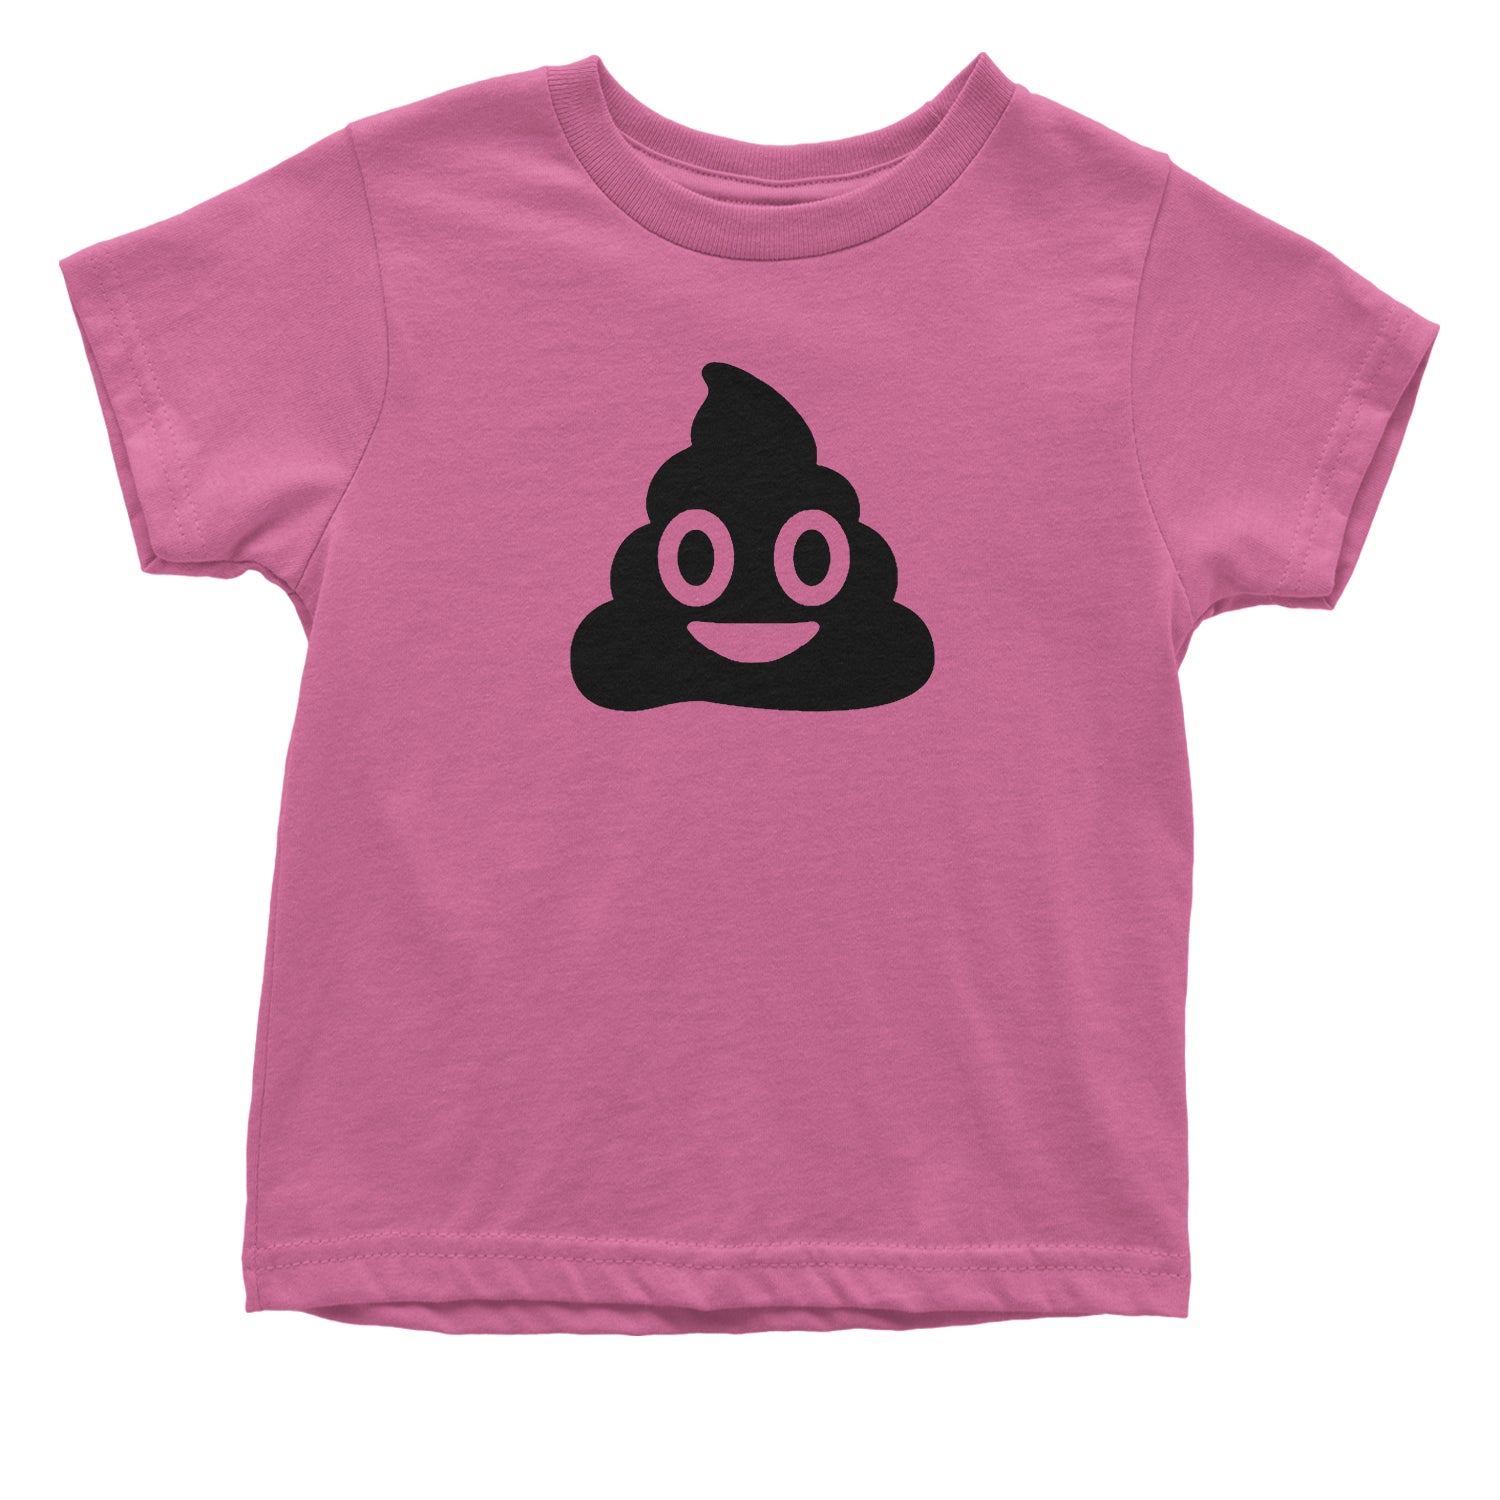 Emoticon Poop Face Smile Face Toddler T-Shirt cosplay, costume, dress, emoji, emote, face, halloween, smiley, up, yellow by Expression Tees